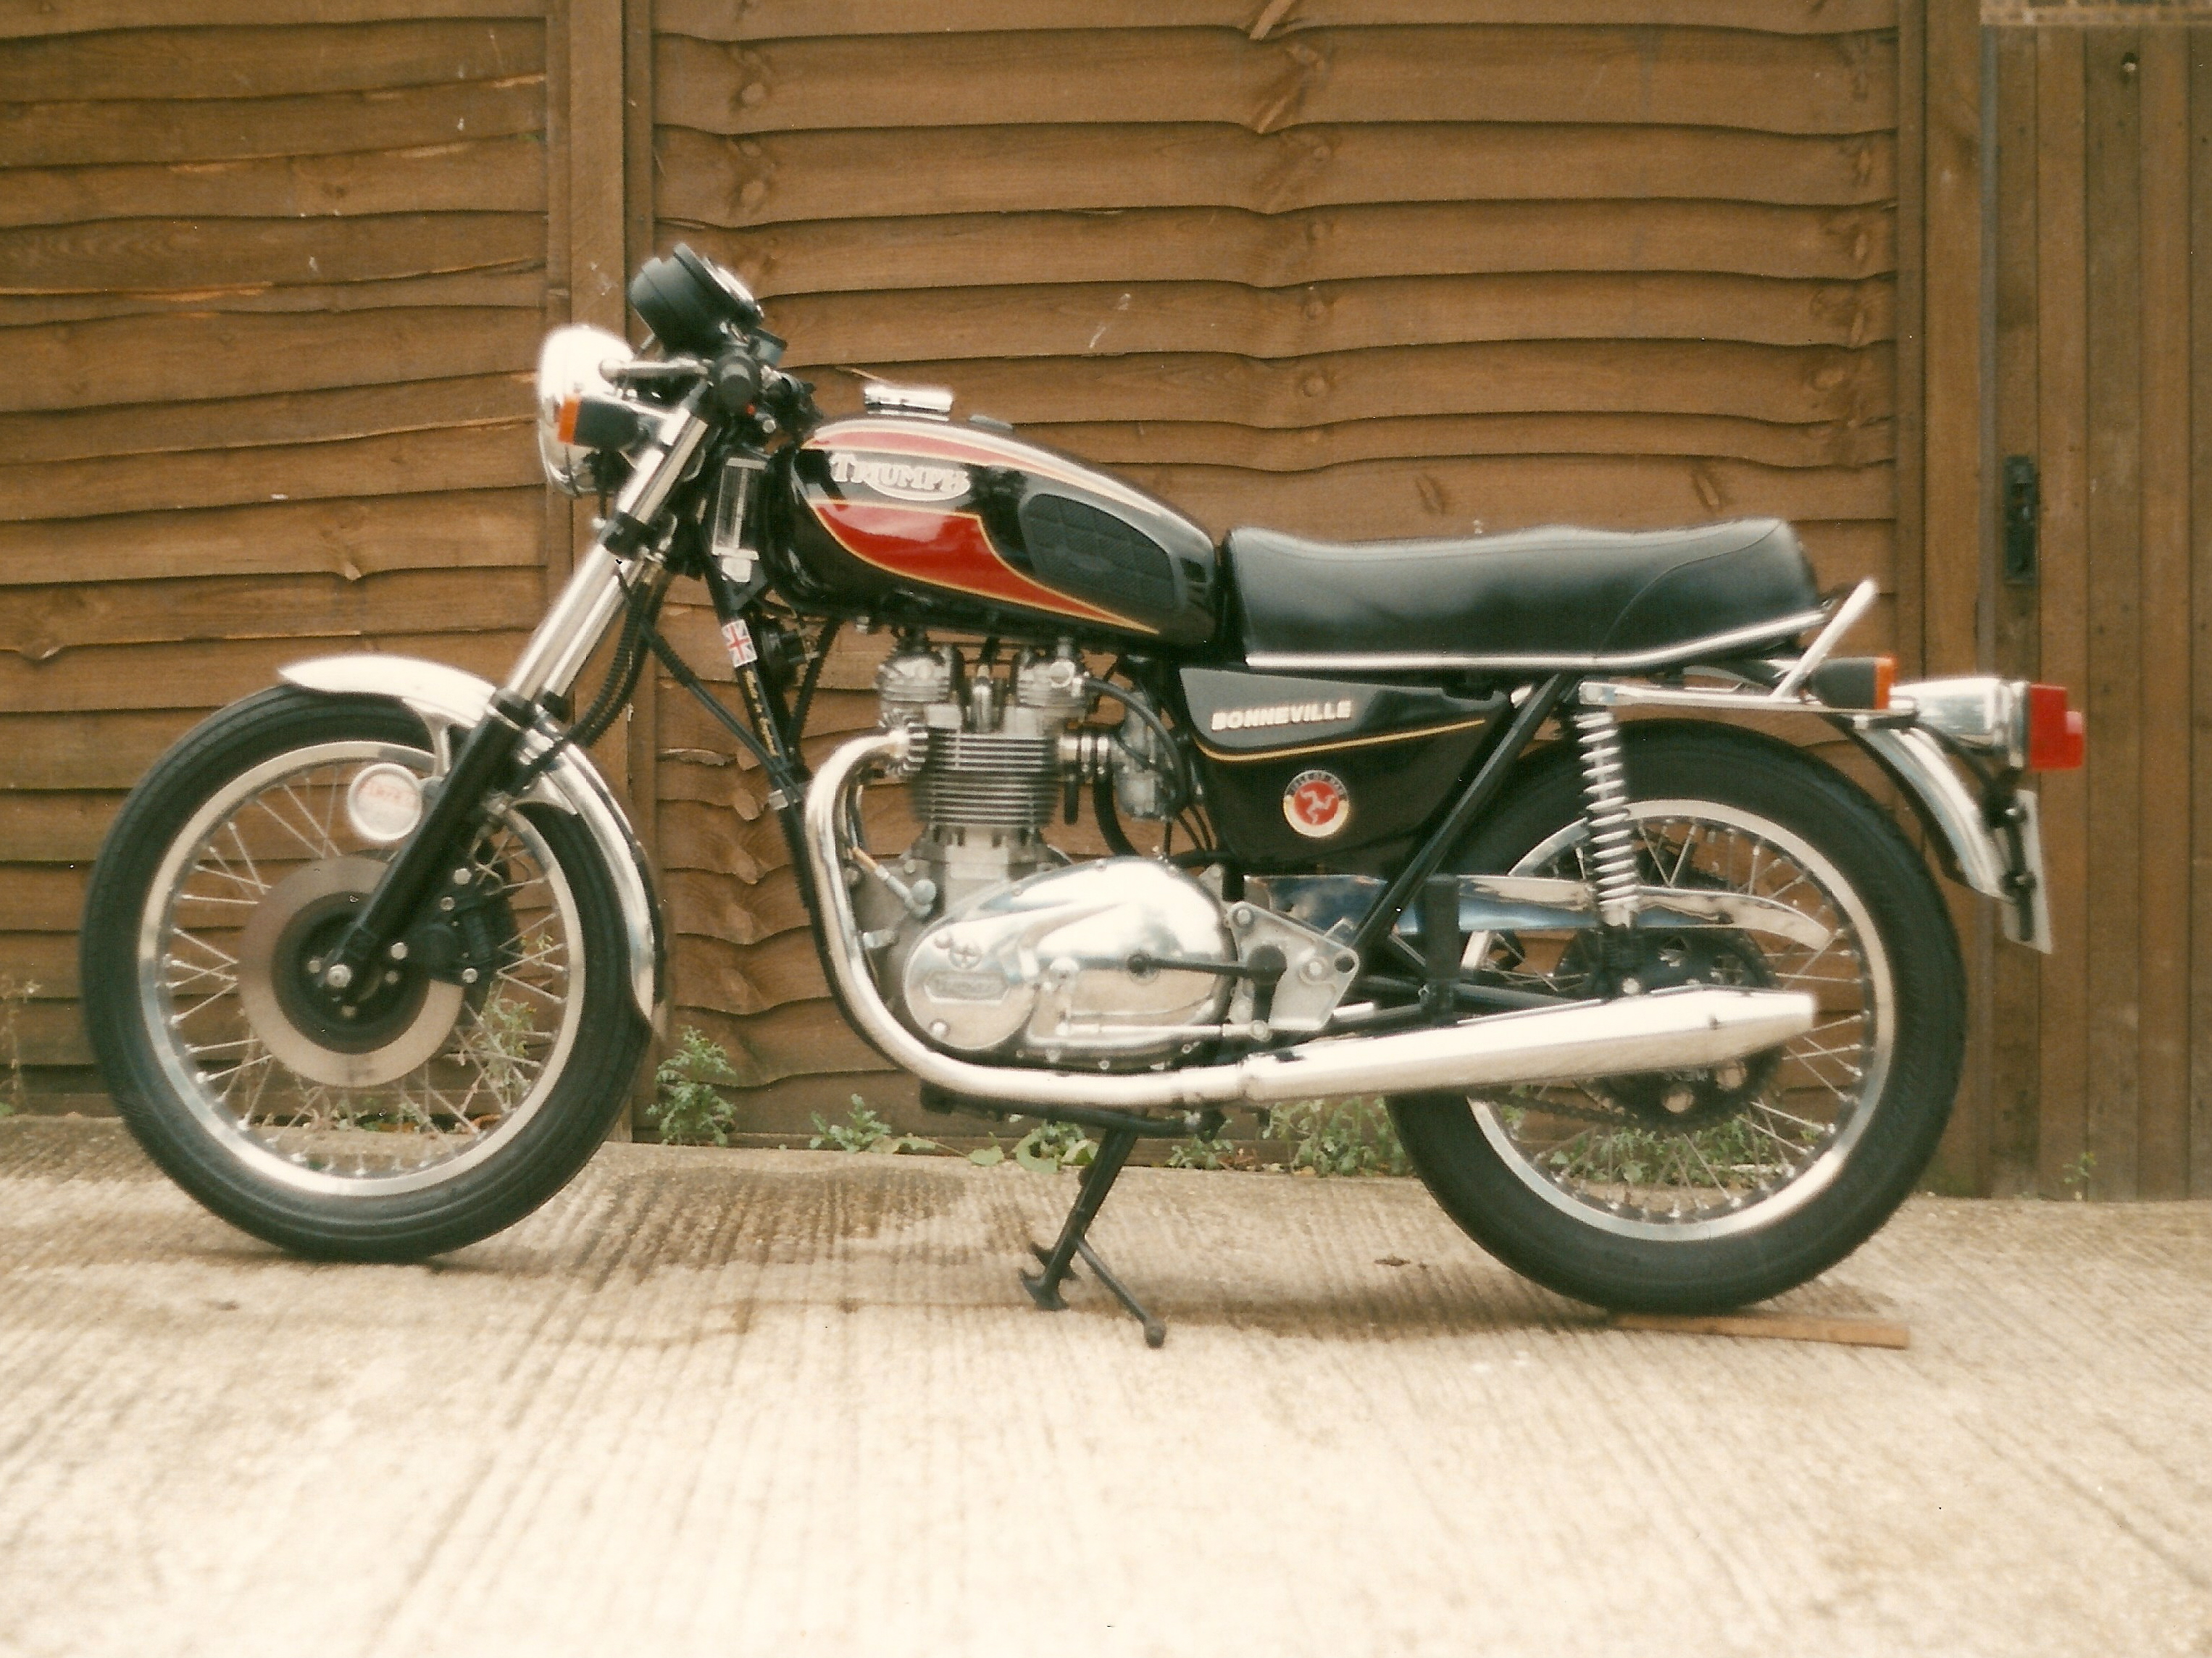  very late T140 and possibly the worst bike I ever owned, notice the Ali barrel and the rear sets